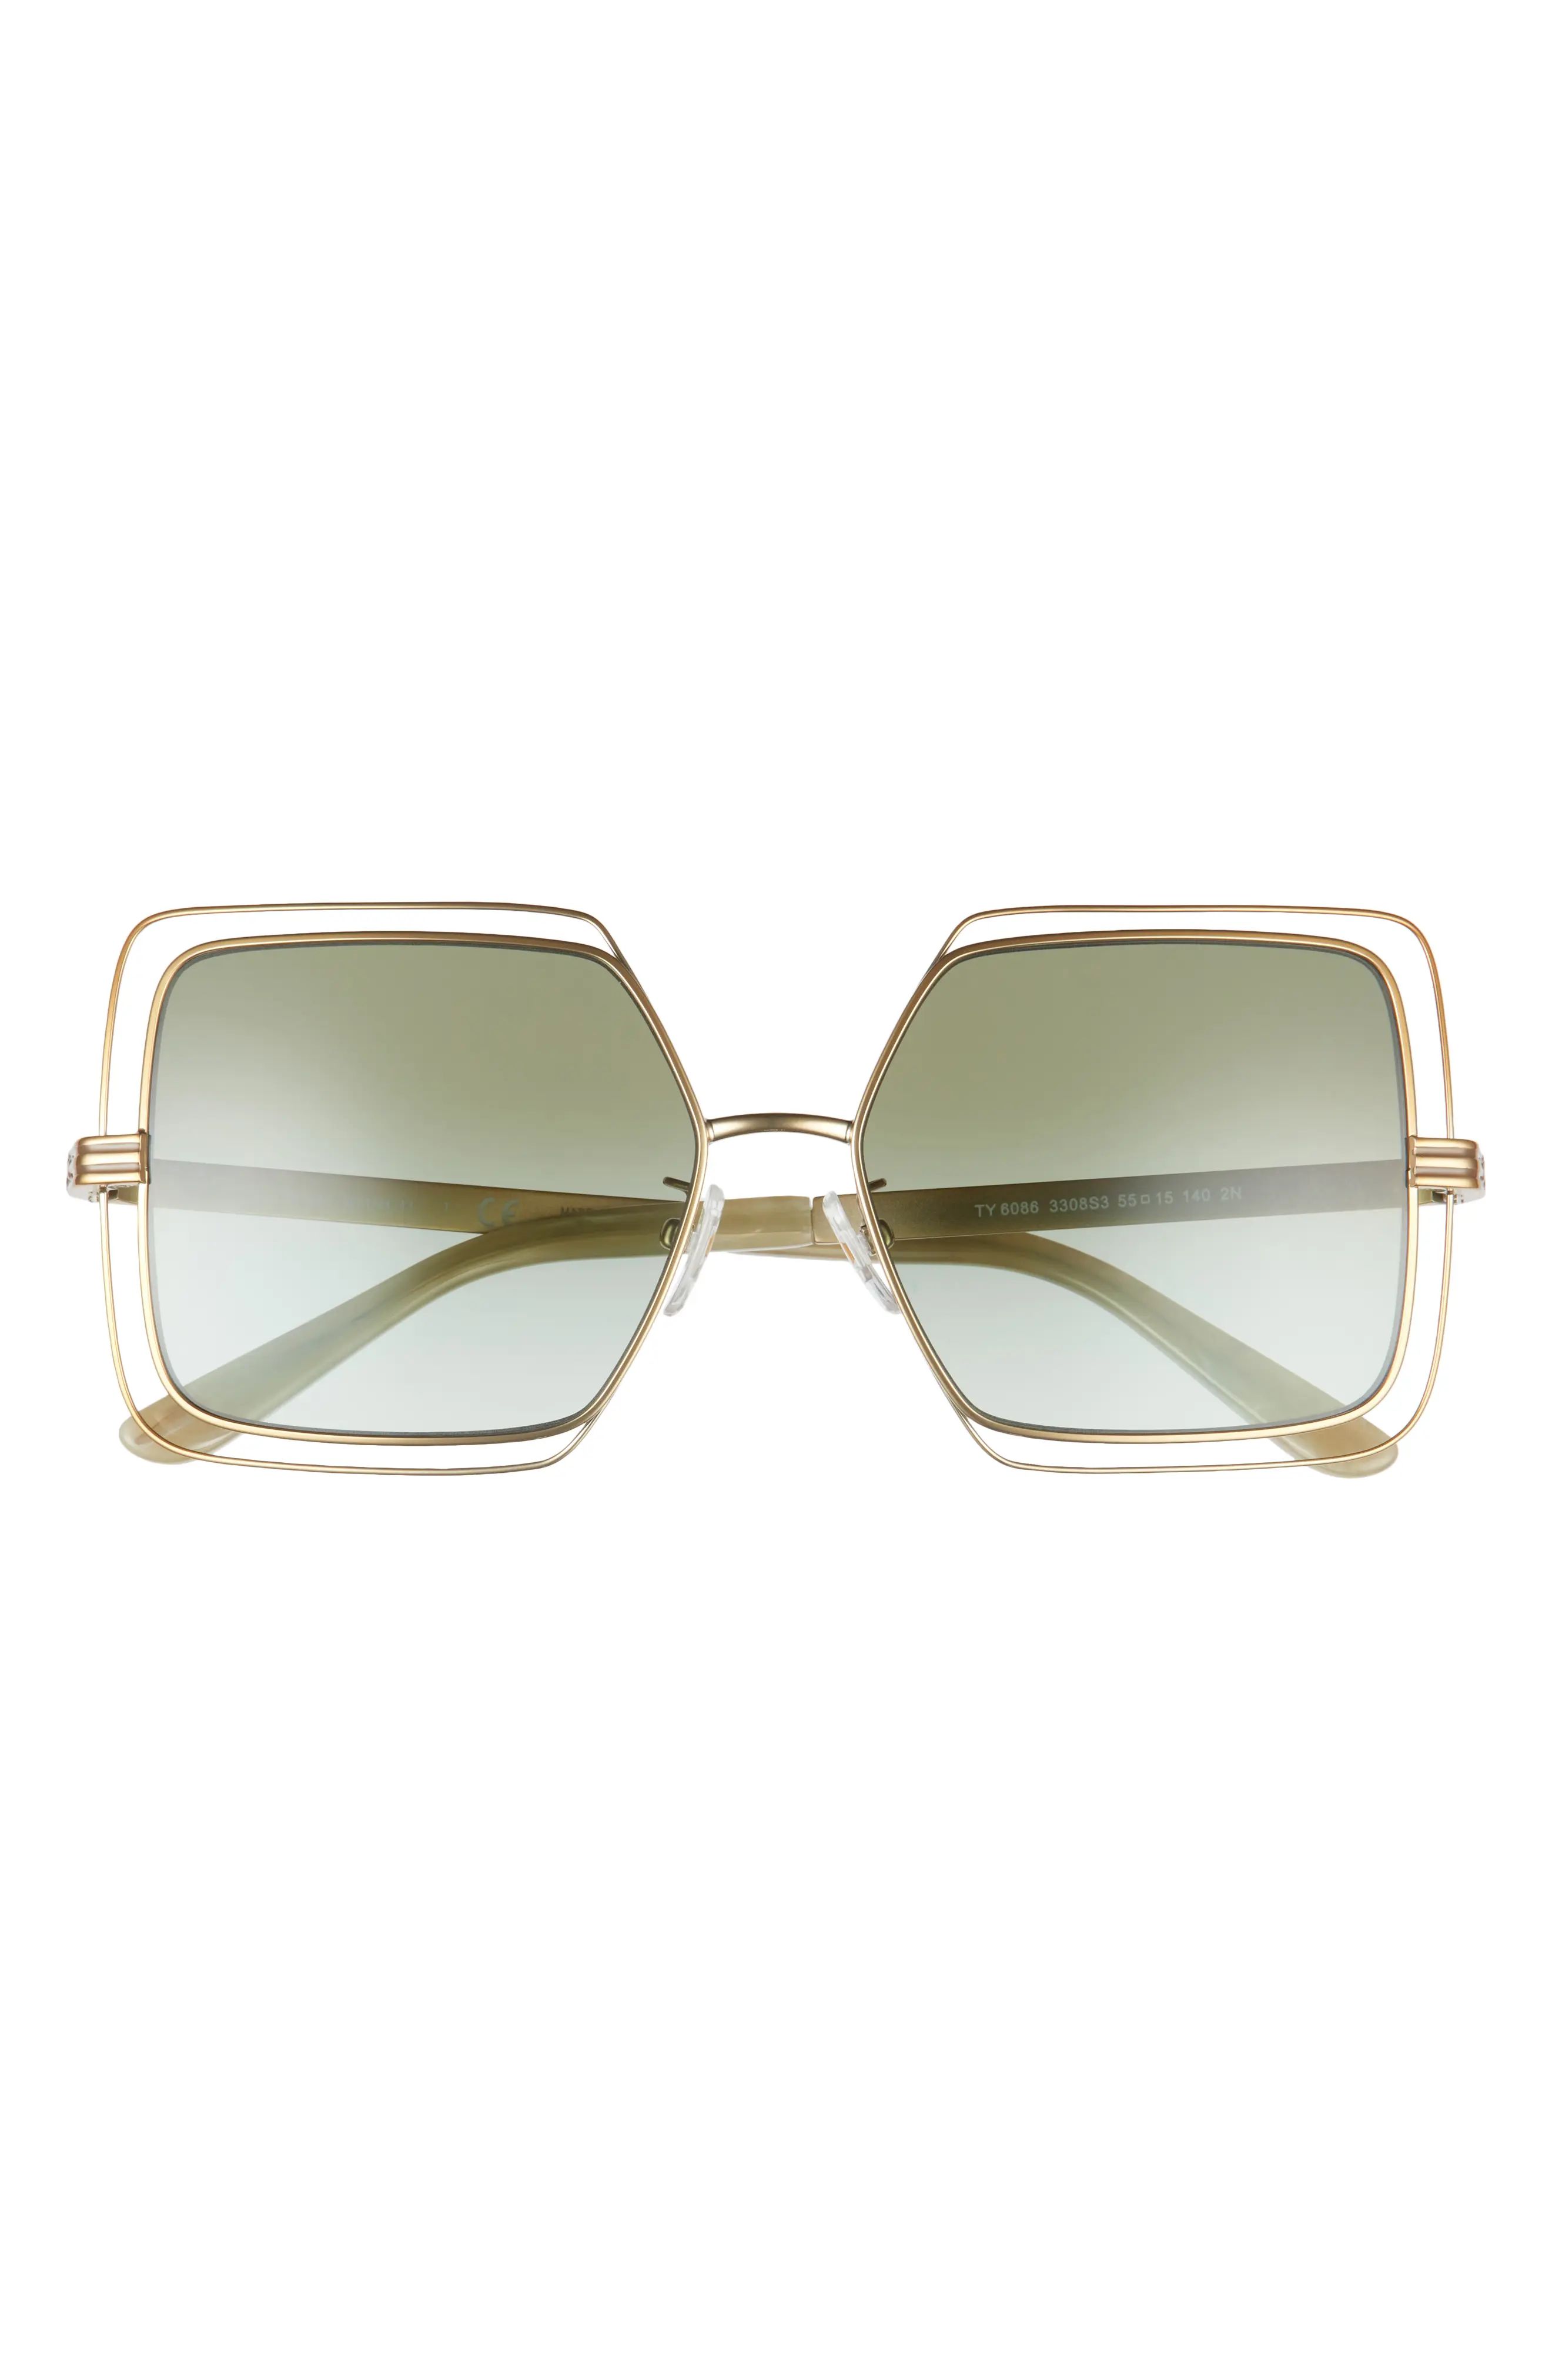 Tory Burch 55mm Gradient Square Sunglasses in Shiny Gold Dark Green at Nordstrom | Nordstrom